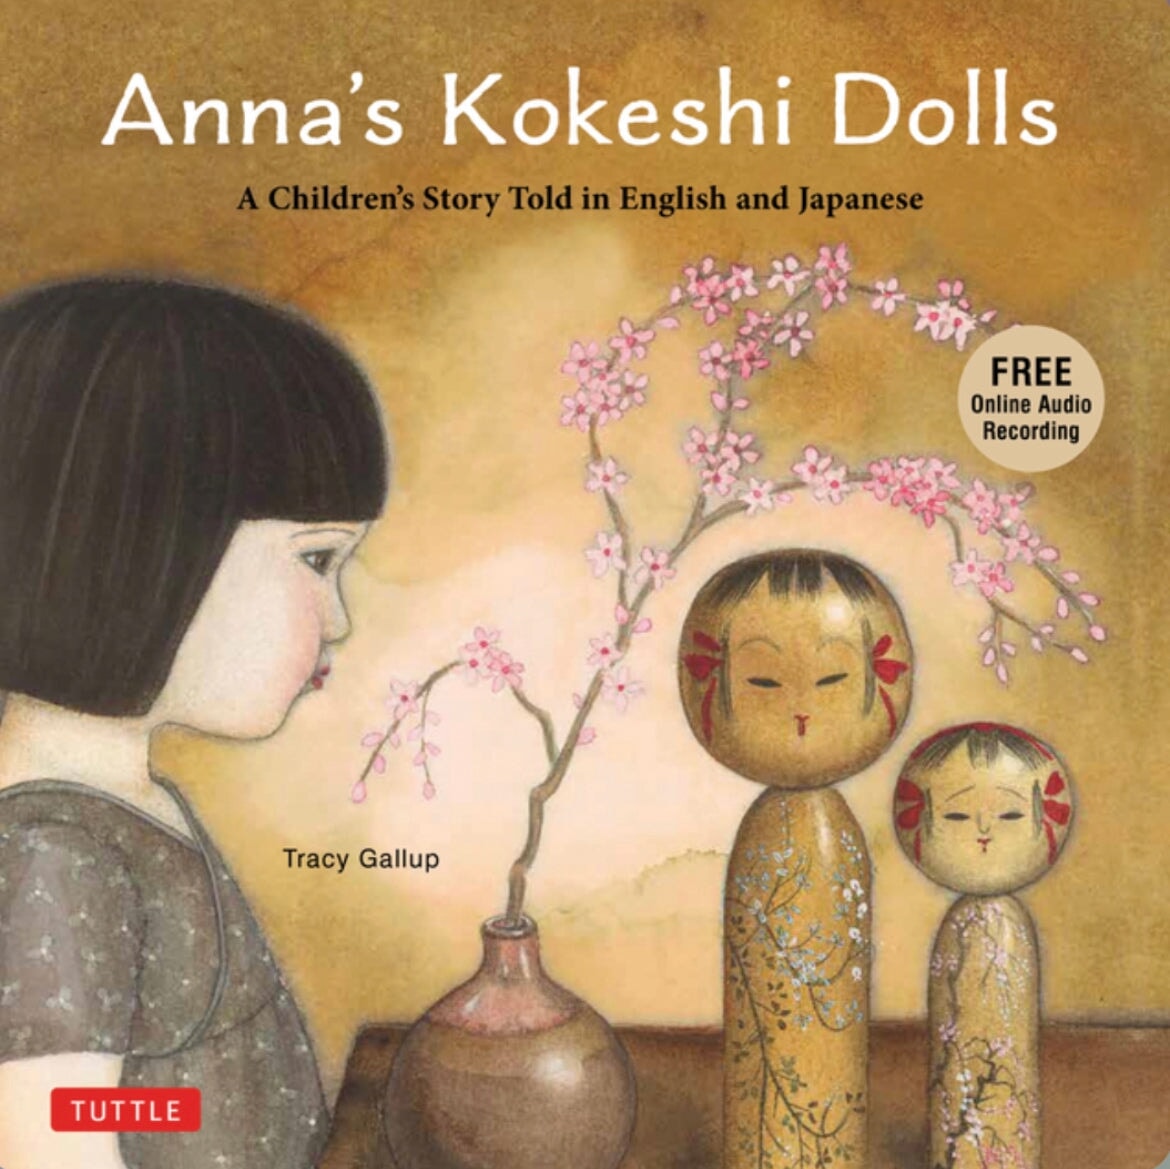 Anna’s Kokeshi Dolls: A Children’s Story Told in English and Japanese Picture Book - Alder & Alouette